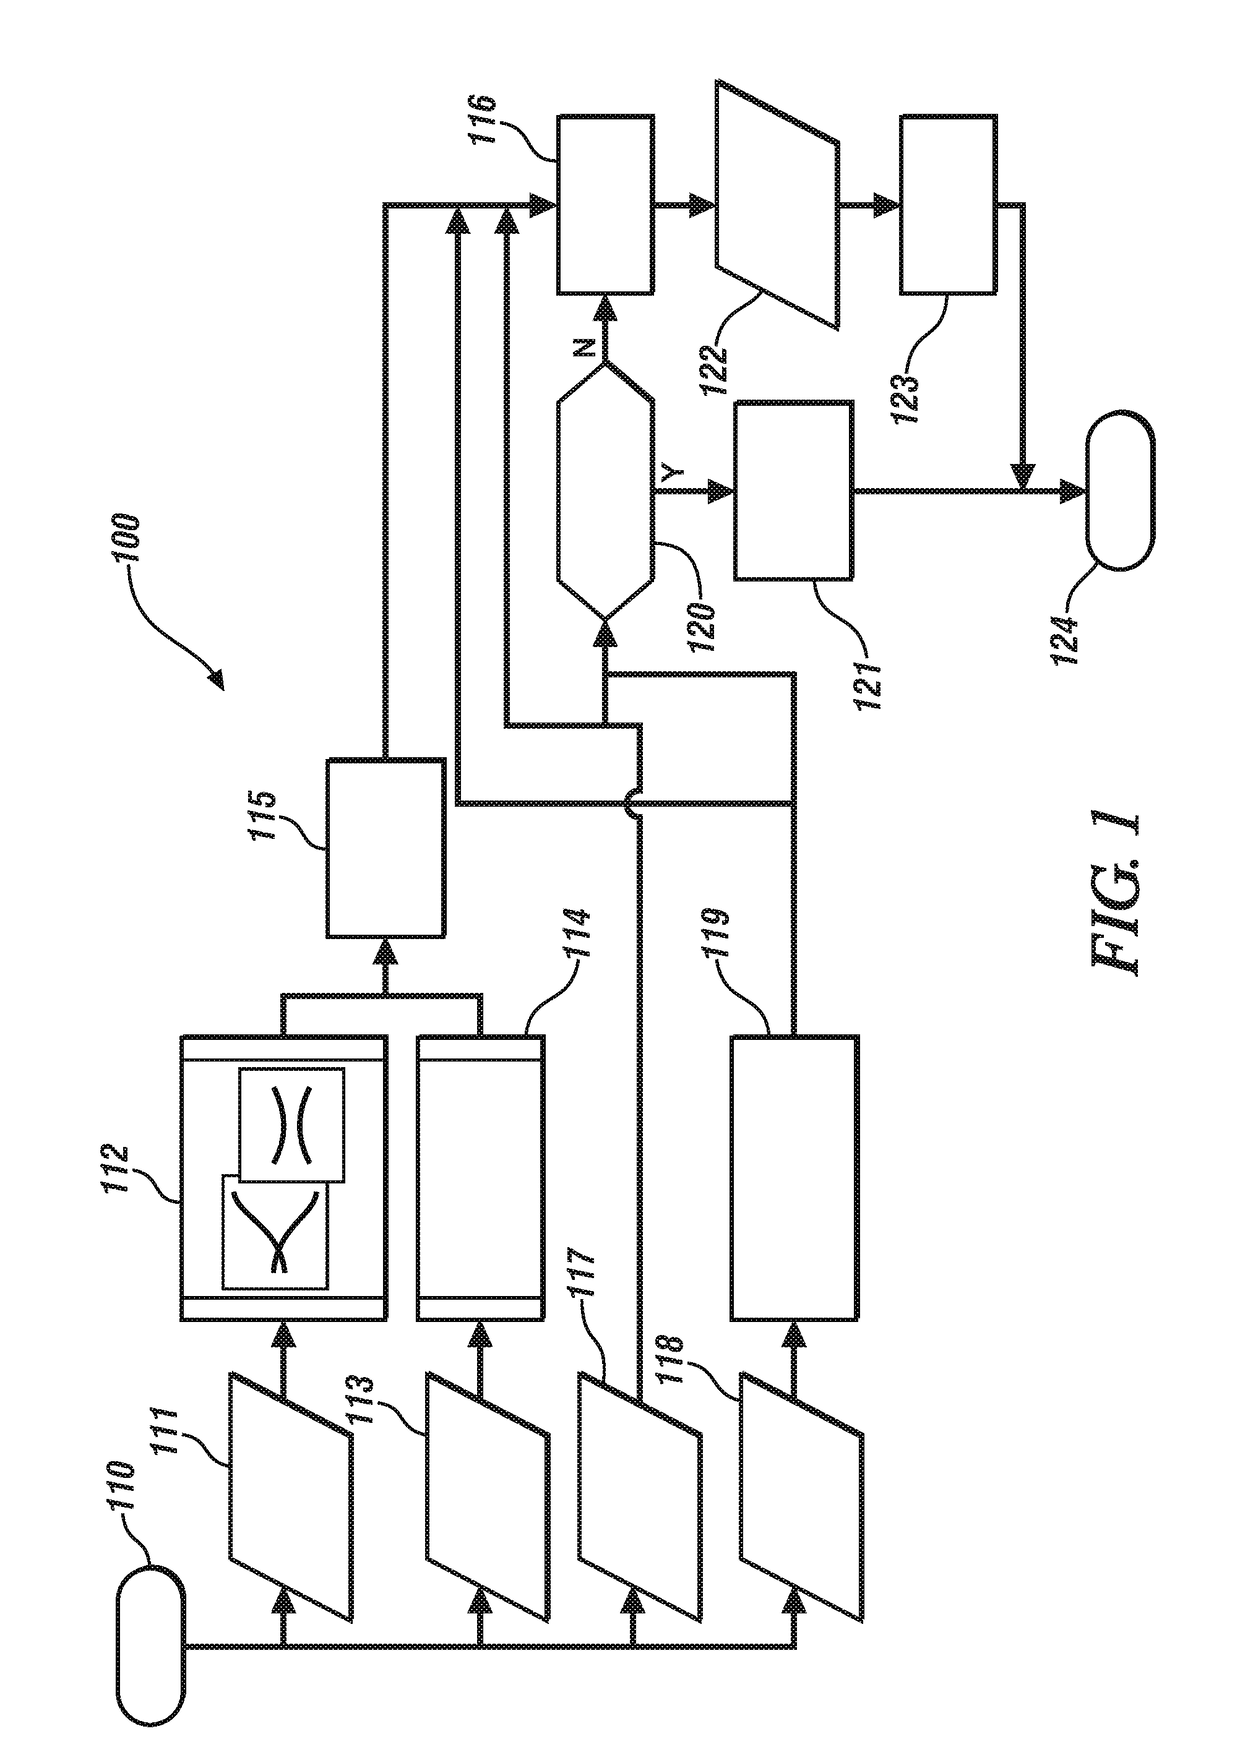 Method and system for generating steering commands to cancel out unwanted steering moments